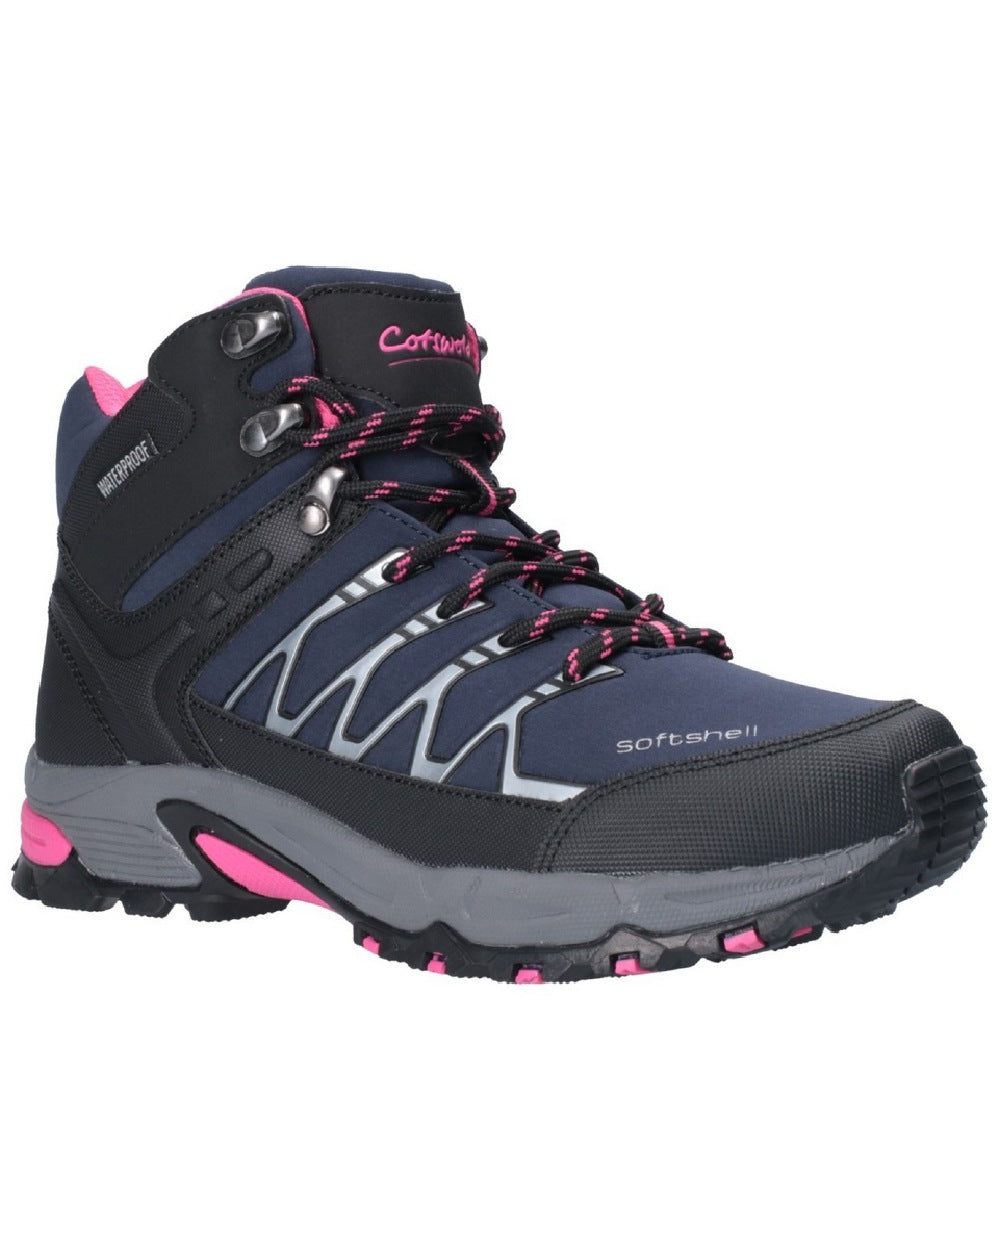 Cotswold Womens Abbeydale Mid Hiking Boots in Black Fuchsia 